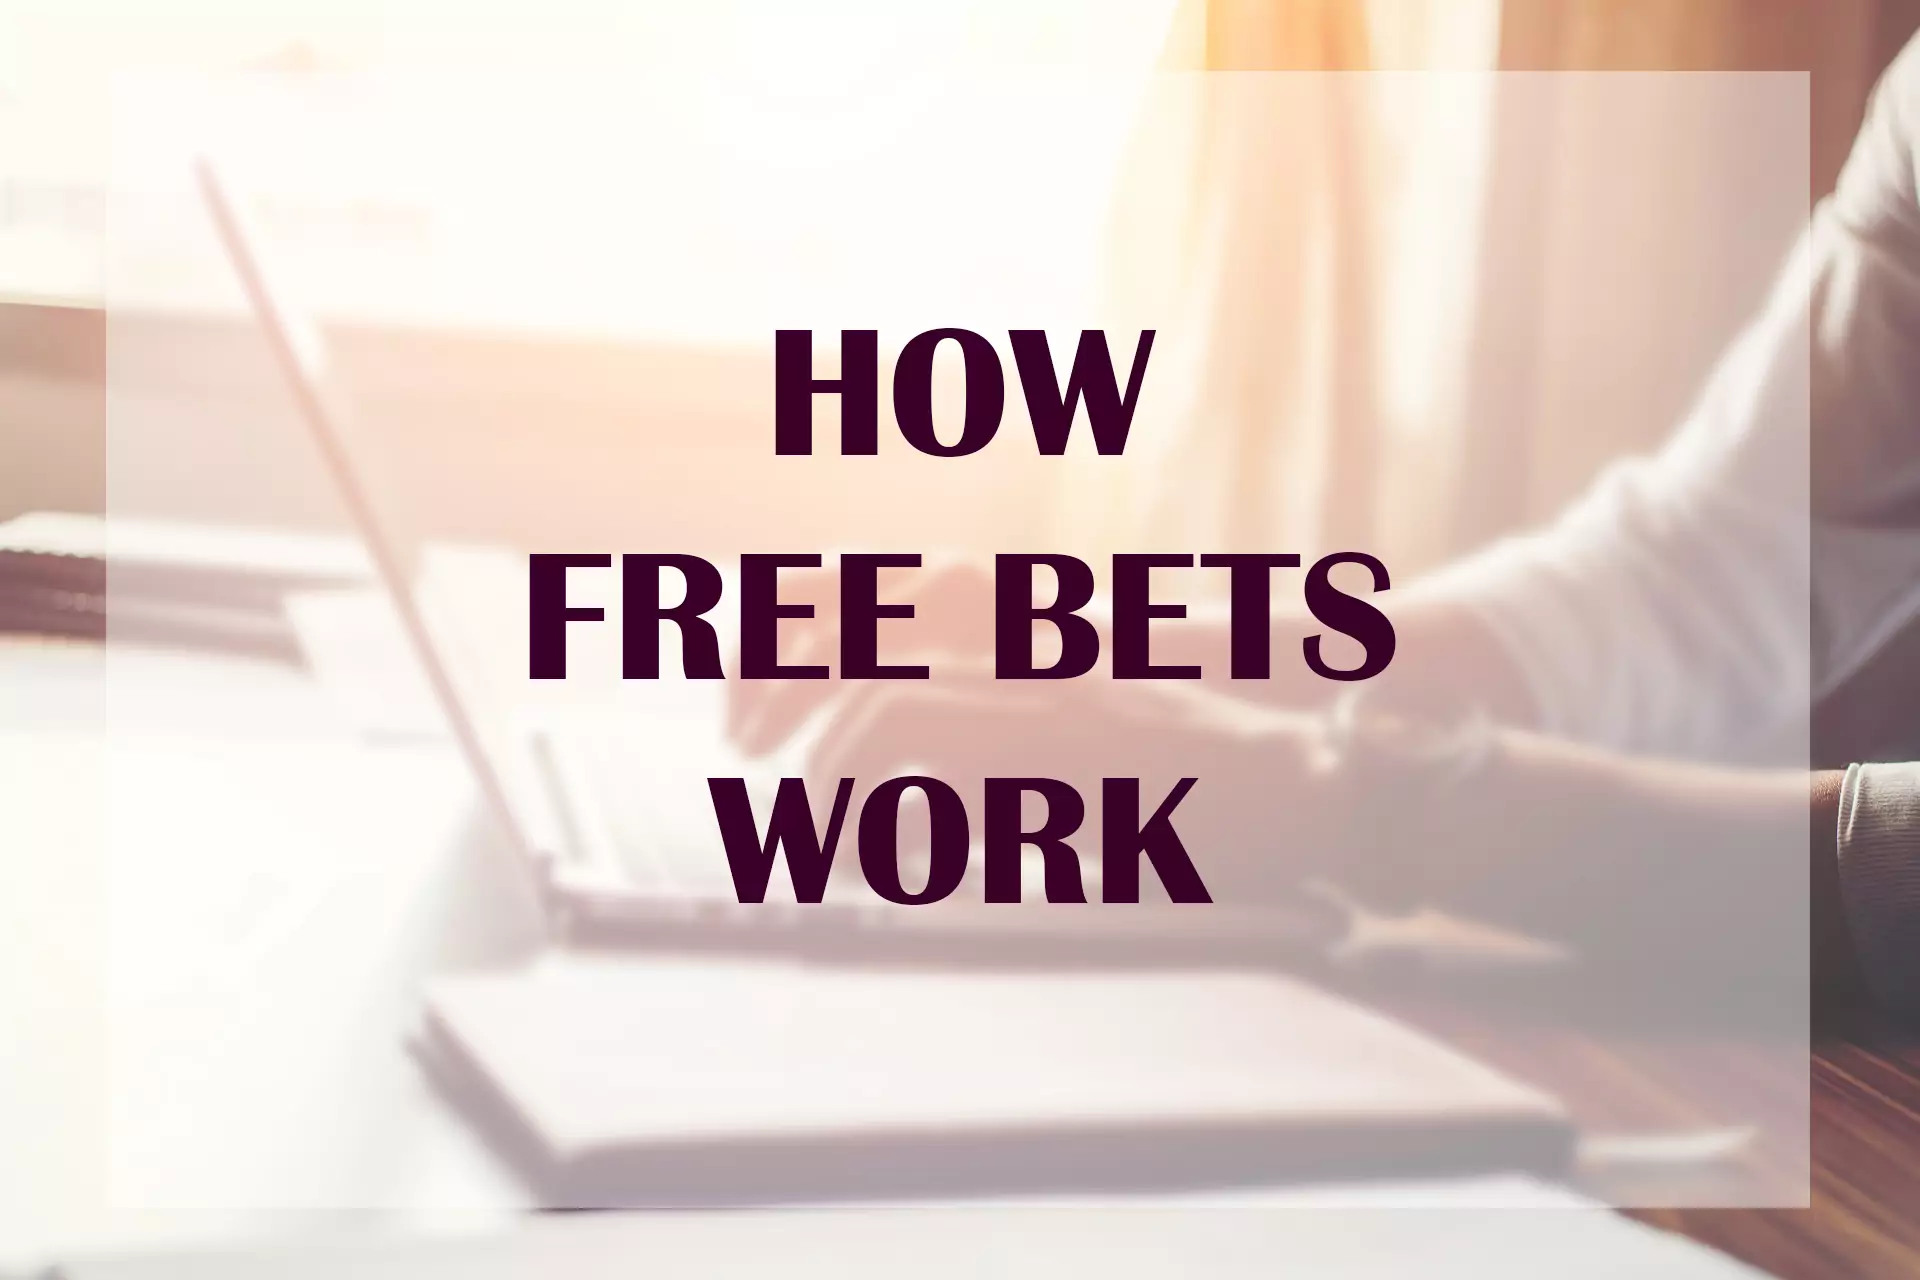 The key point of free bets is that site presents you a chance to try betting freely.